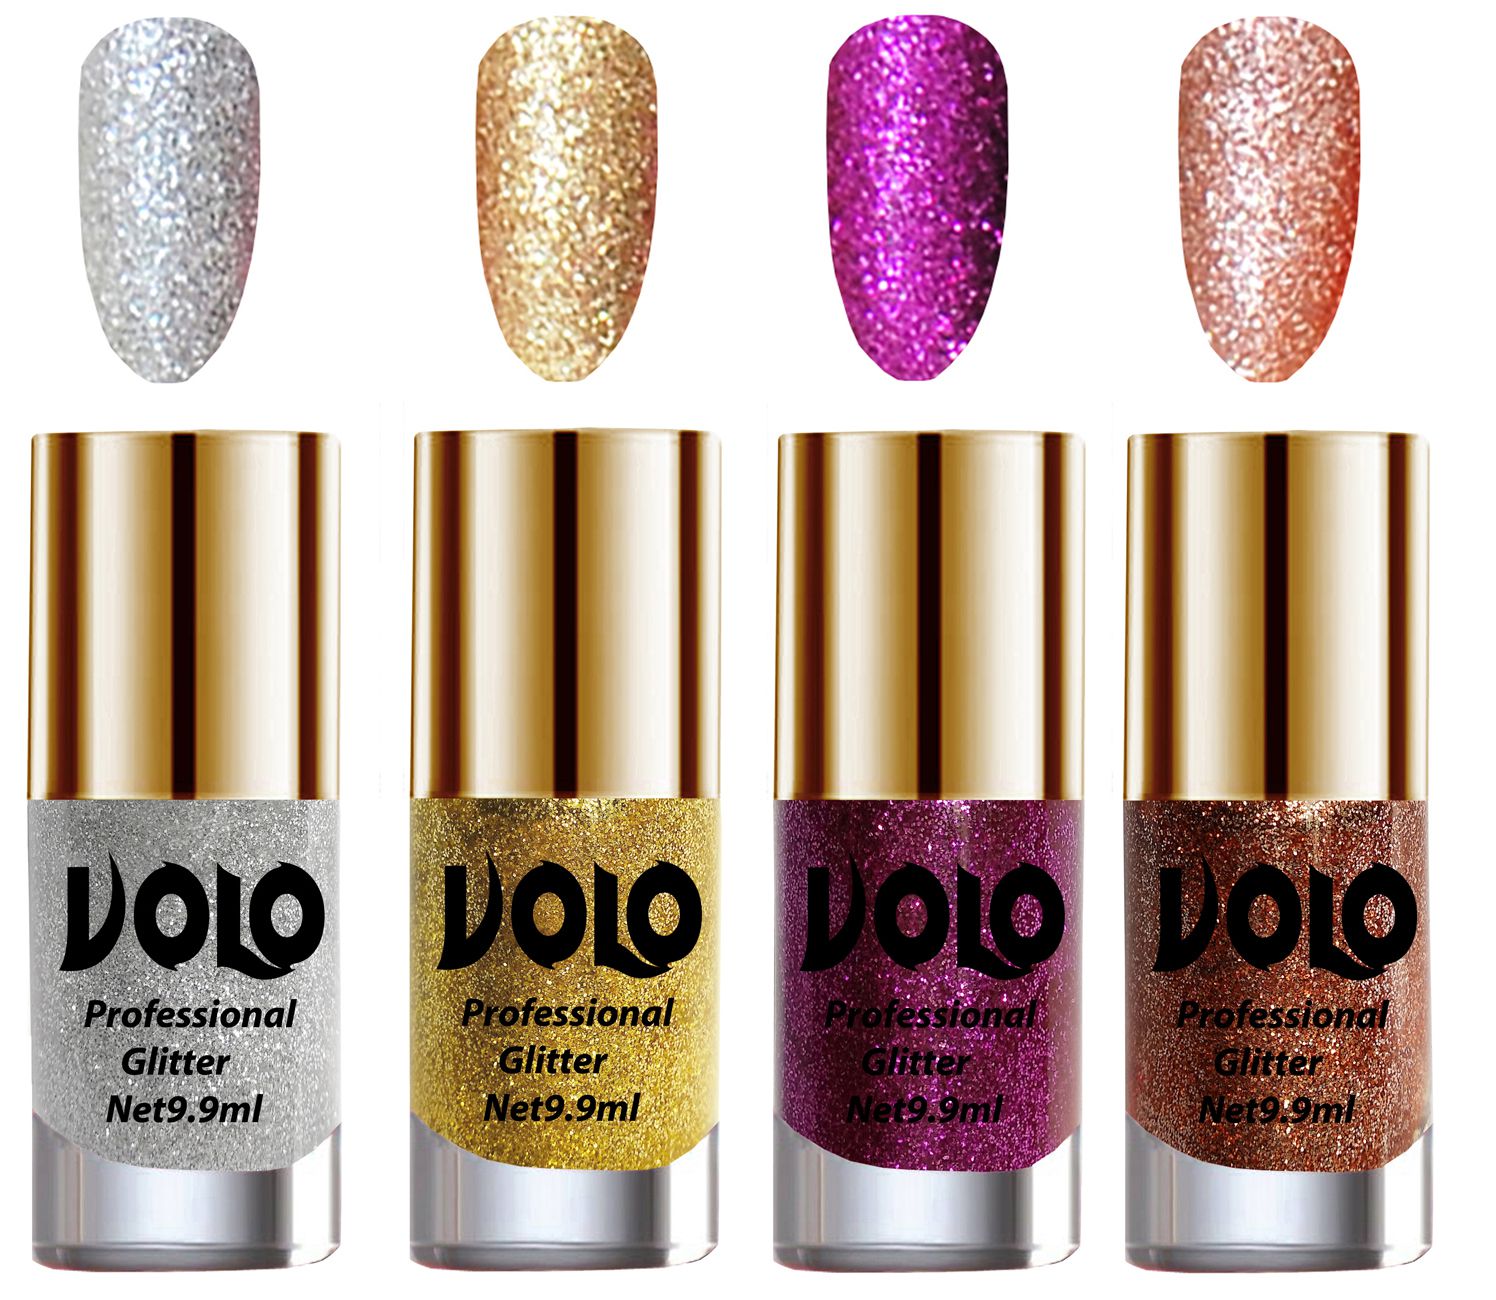     			VOLO Professionally Used Glitter Shine Nail Polish Silver,Gold,Purple Pink Pack of 4 39 mL